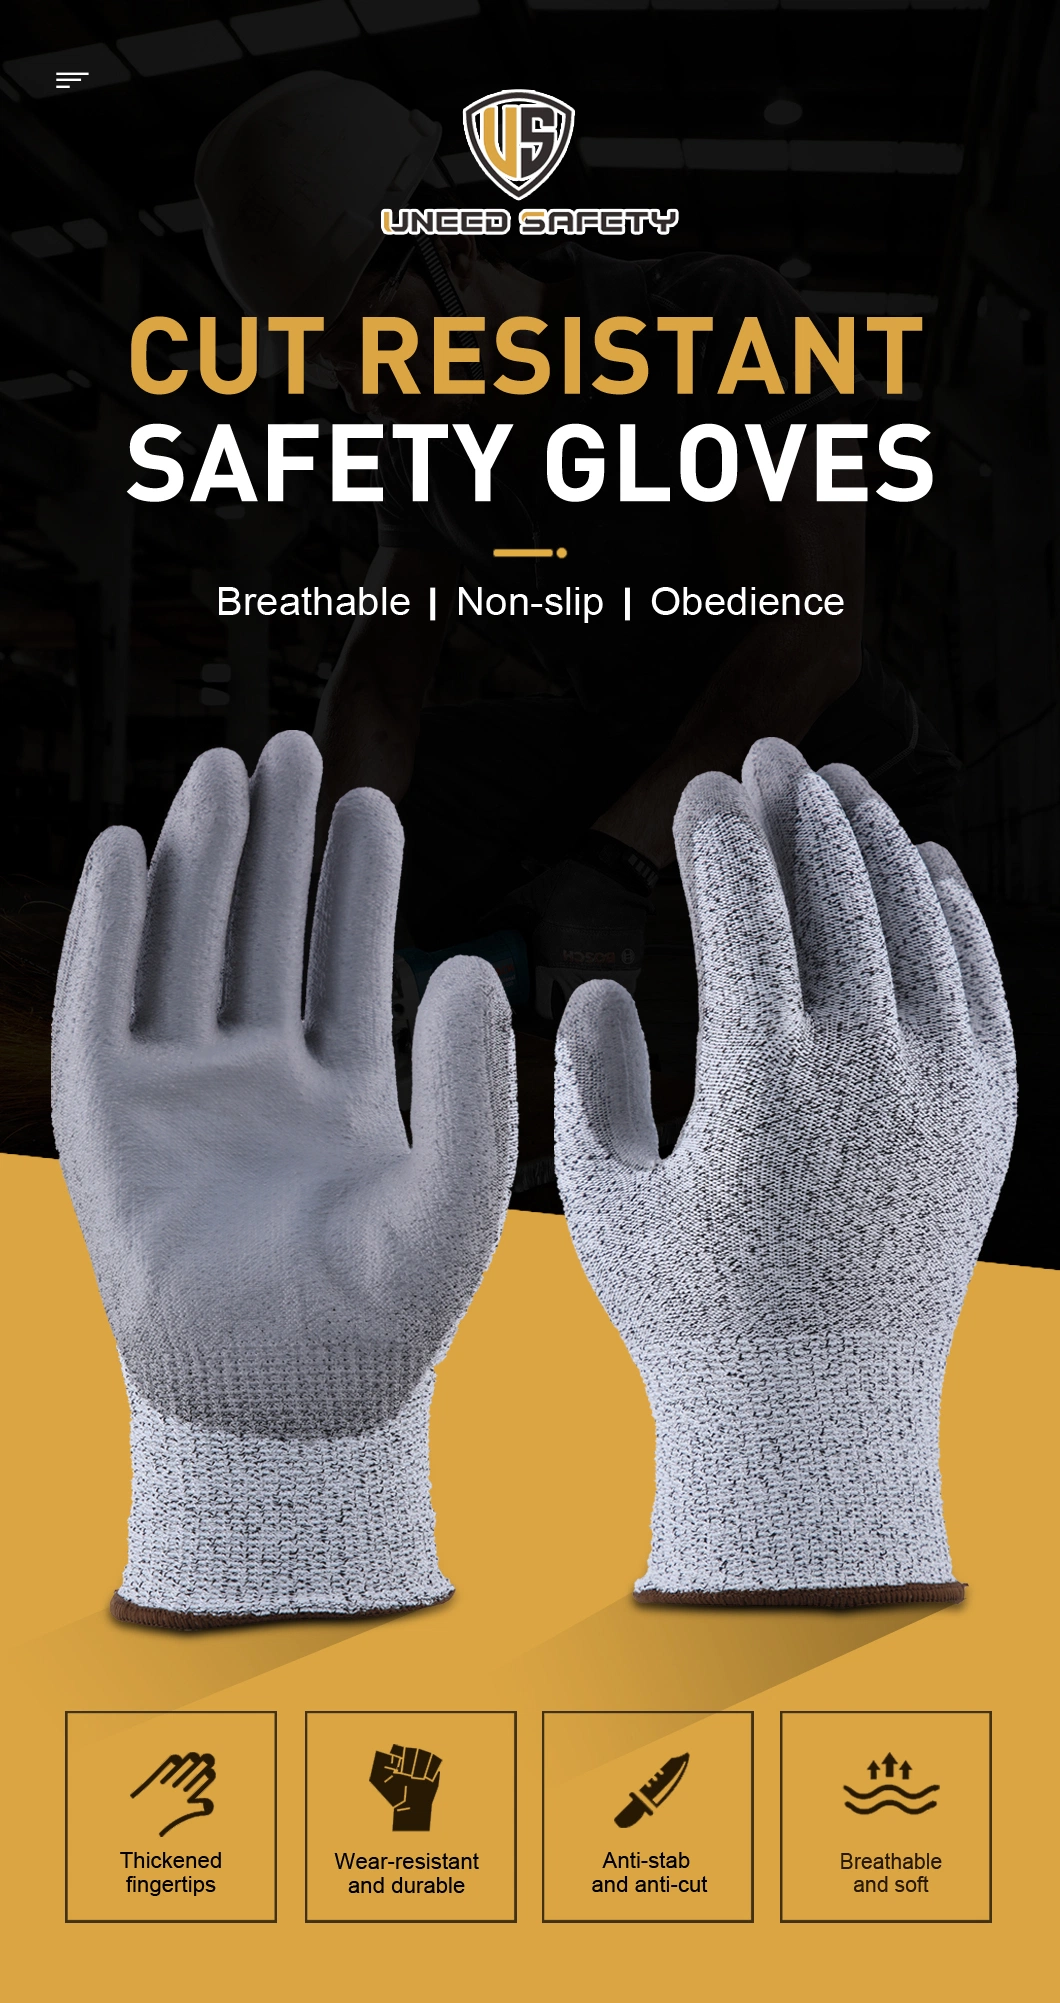 Hppe Industrial Fiber Anti Cut Resistant White Gray PU Coated Wholesale Protective Working Labor Working Safety Work Gloves